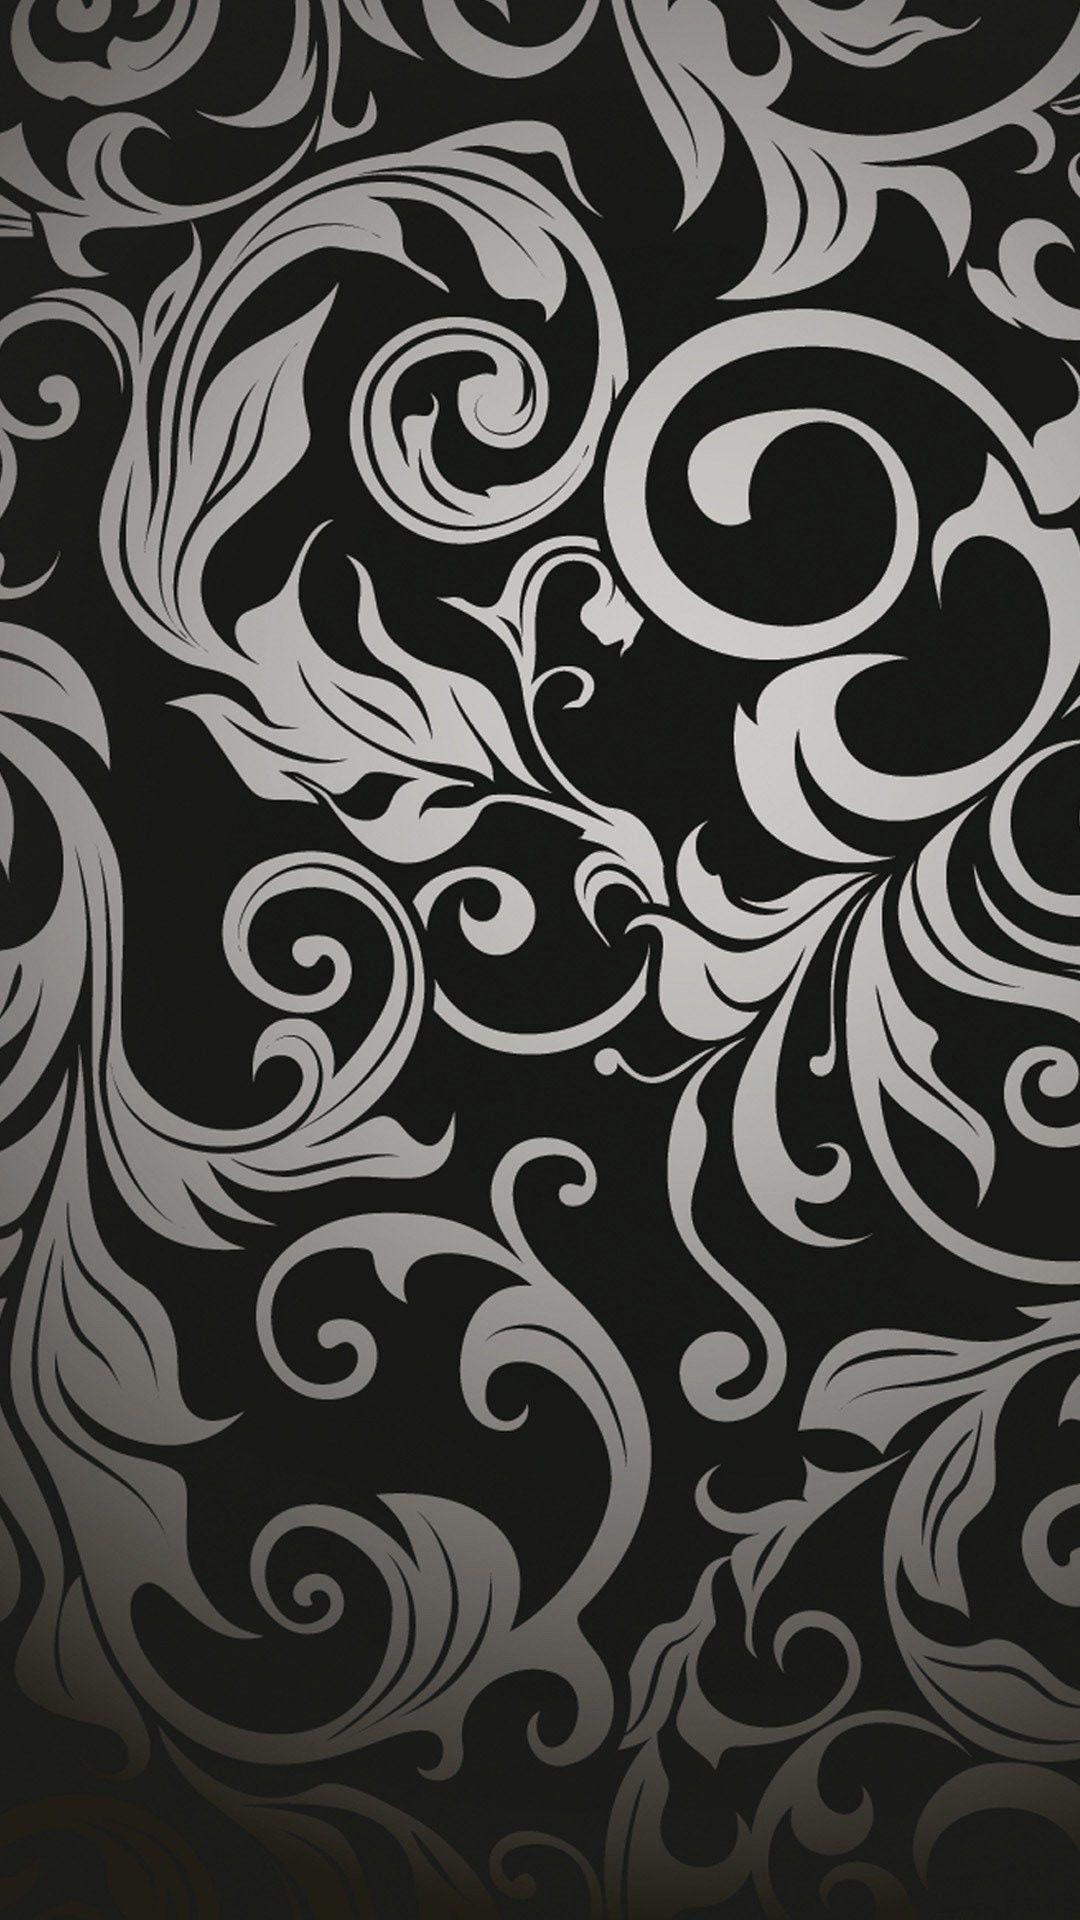 Black and White Abstract Wallpaper 15 HD Wallpaper Free